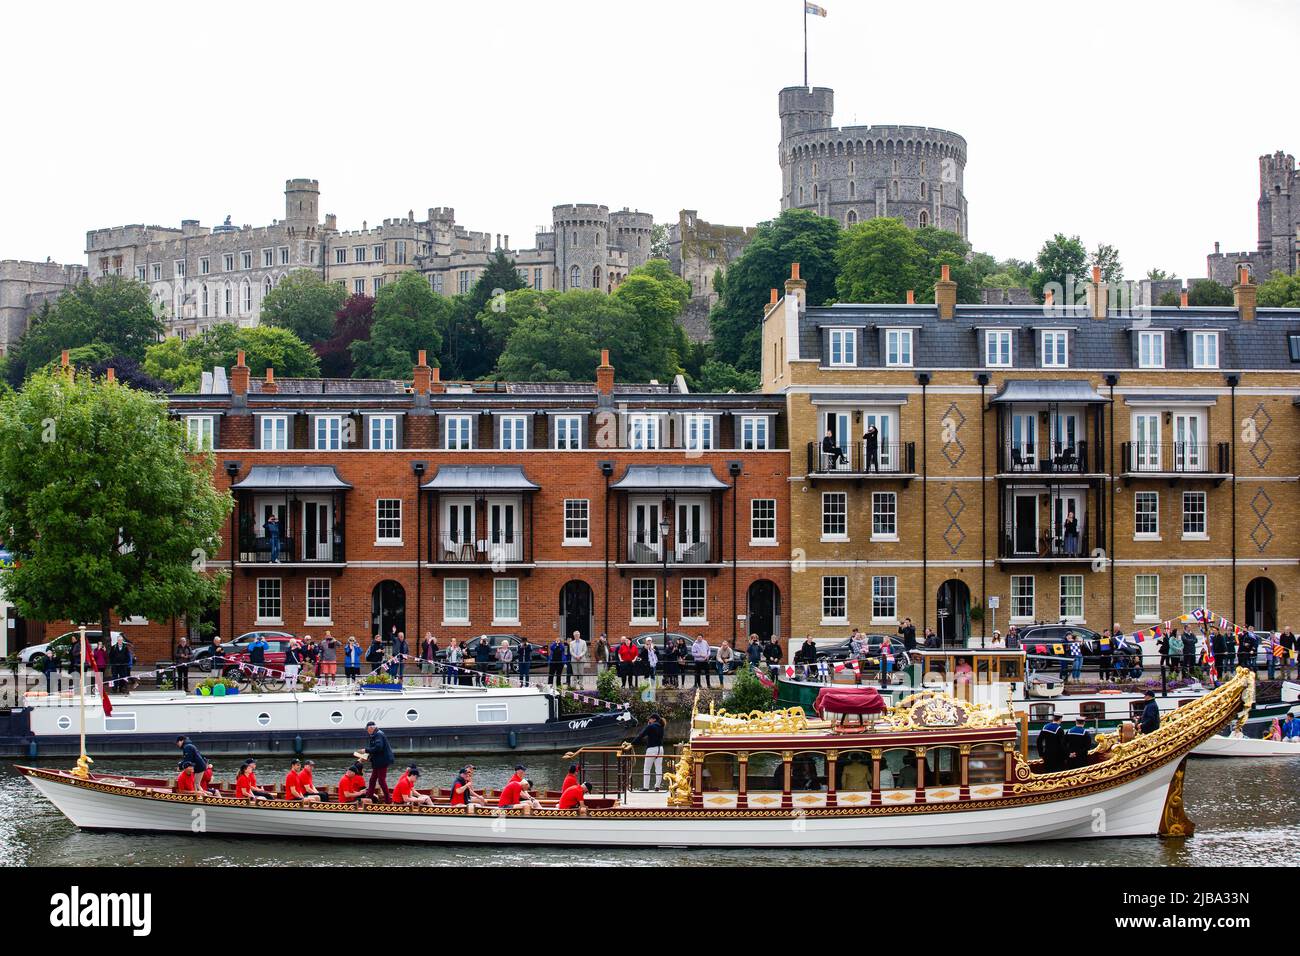 Windsor, UK. 4th June, 2022. Gloriana, the Queen's Row Barge, passes Windsor Castle at the head of the Platinum Jubilee Flotilla to mark Queen Elizabeth II's Platinum Jubilee. Windsor is hosting a series of Platinum Jubilee celebrations over the Jubilee Bank Holiday weekend. Credit: Mark Kerrison/Alamy Live News Stock Photo